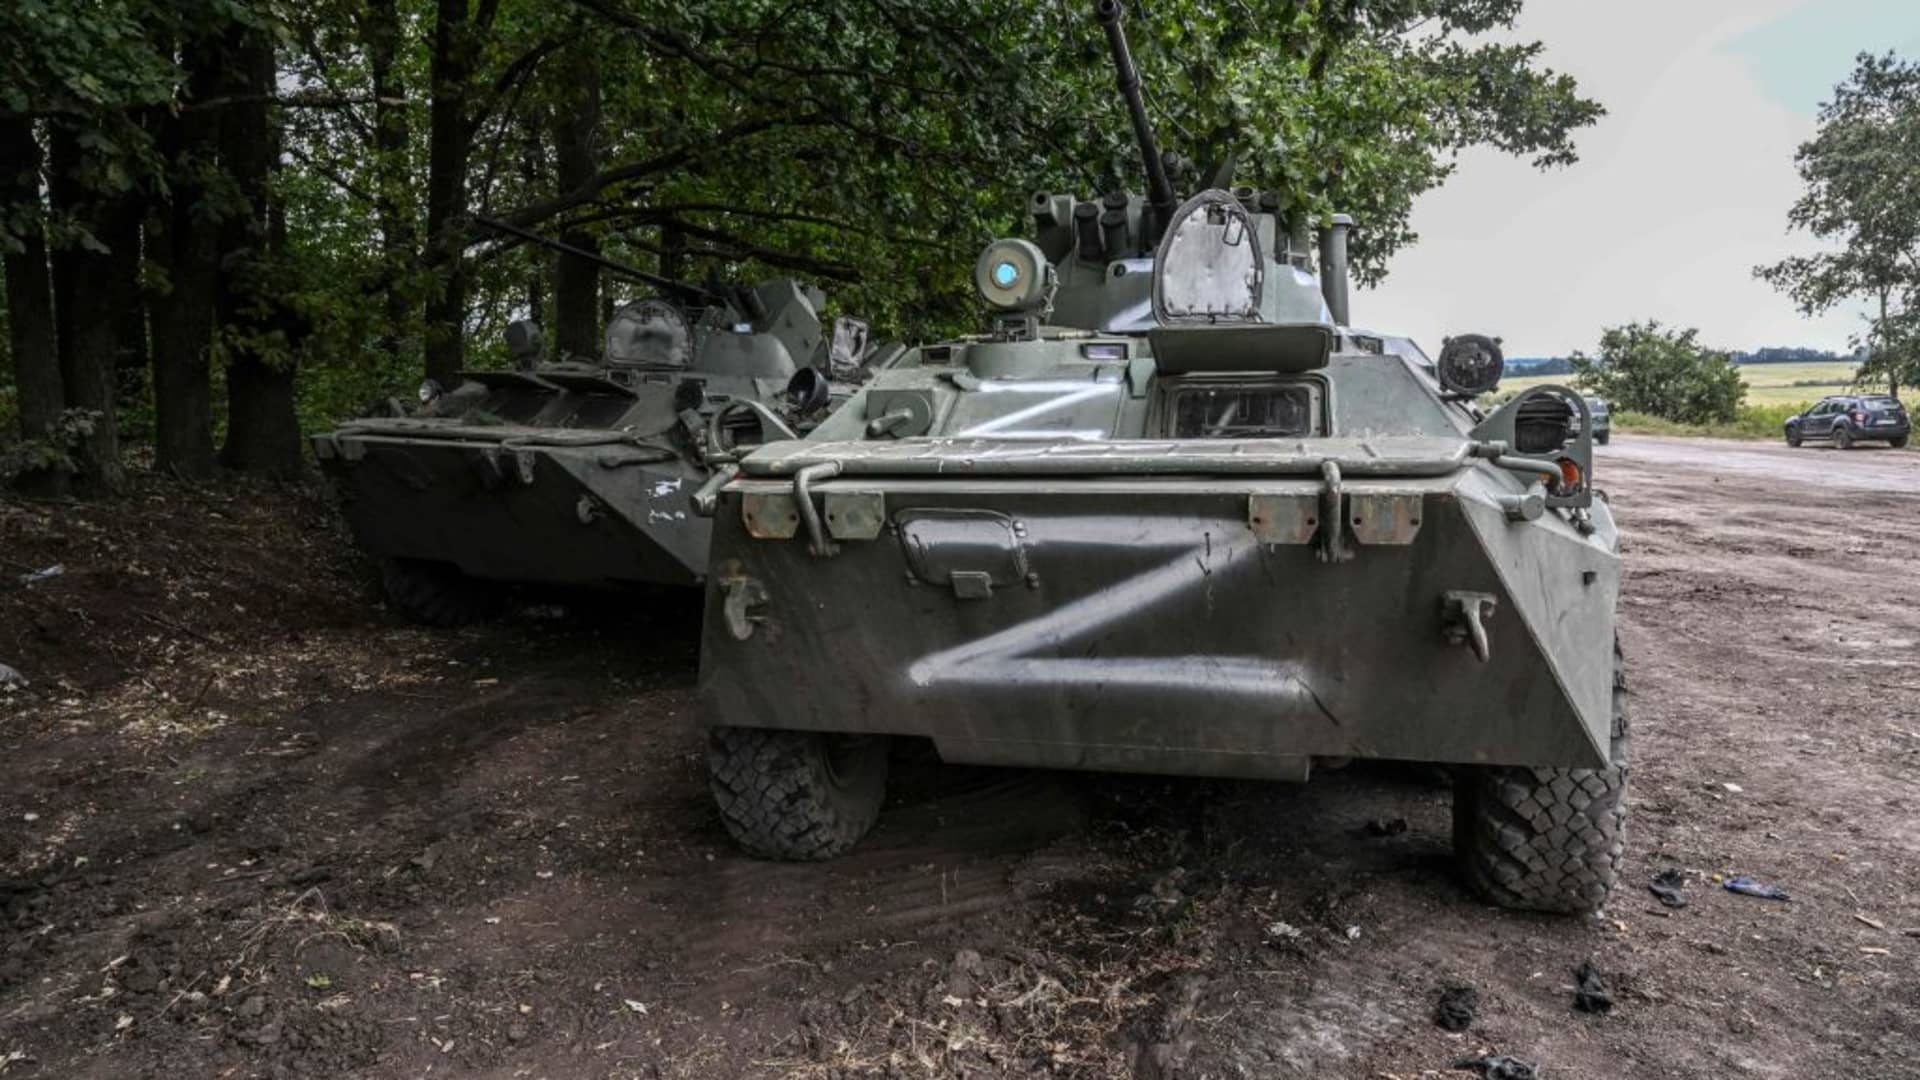 Russian military vehicles in Balakliya on Sept. 10, 2022. Zelenskyy said that, in Balakliya, a town in the northeastern Kharkiv region recaptured by Ukrainian forces last week, the payment of pensions has already resumed.